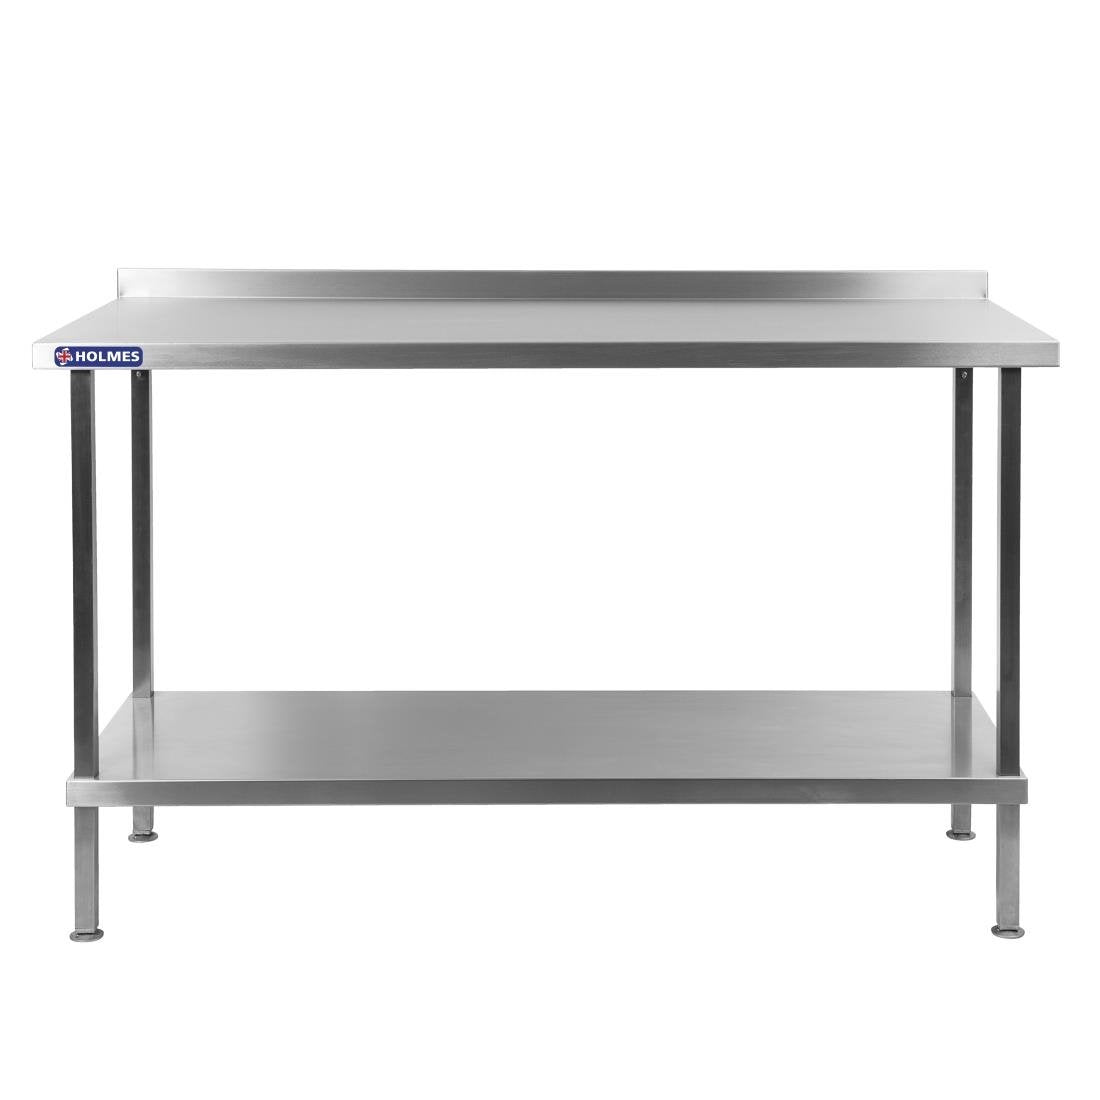 DR036 Holmes Stainless Steel Wall Table 1200mm JD Catering Equipment Solutions Ltd